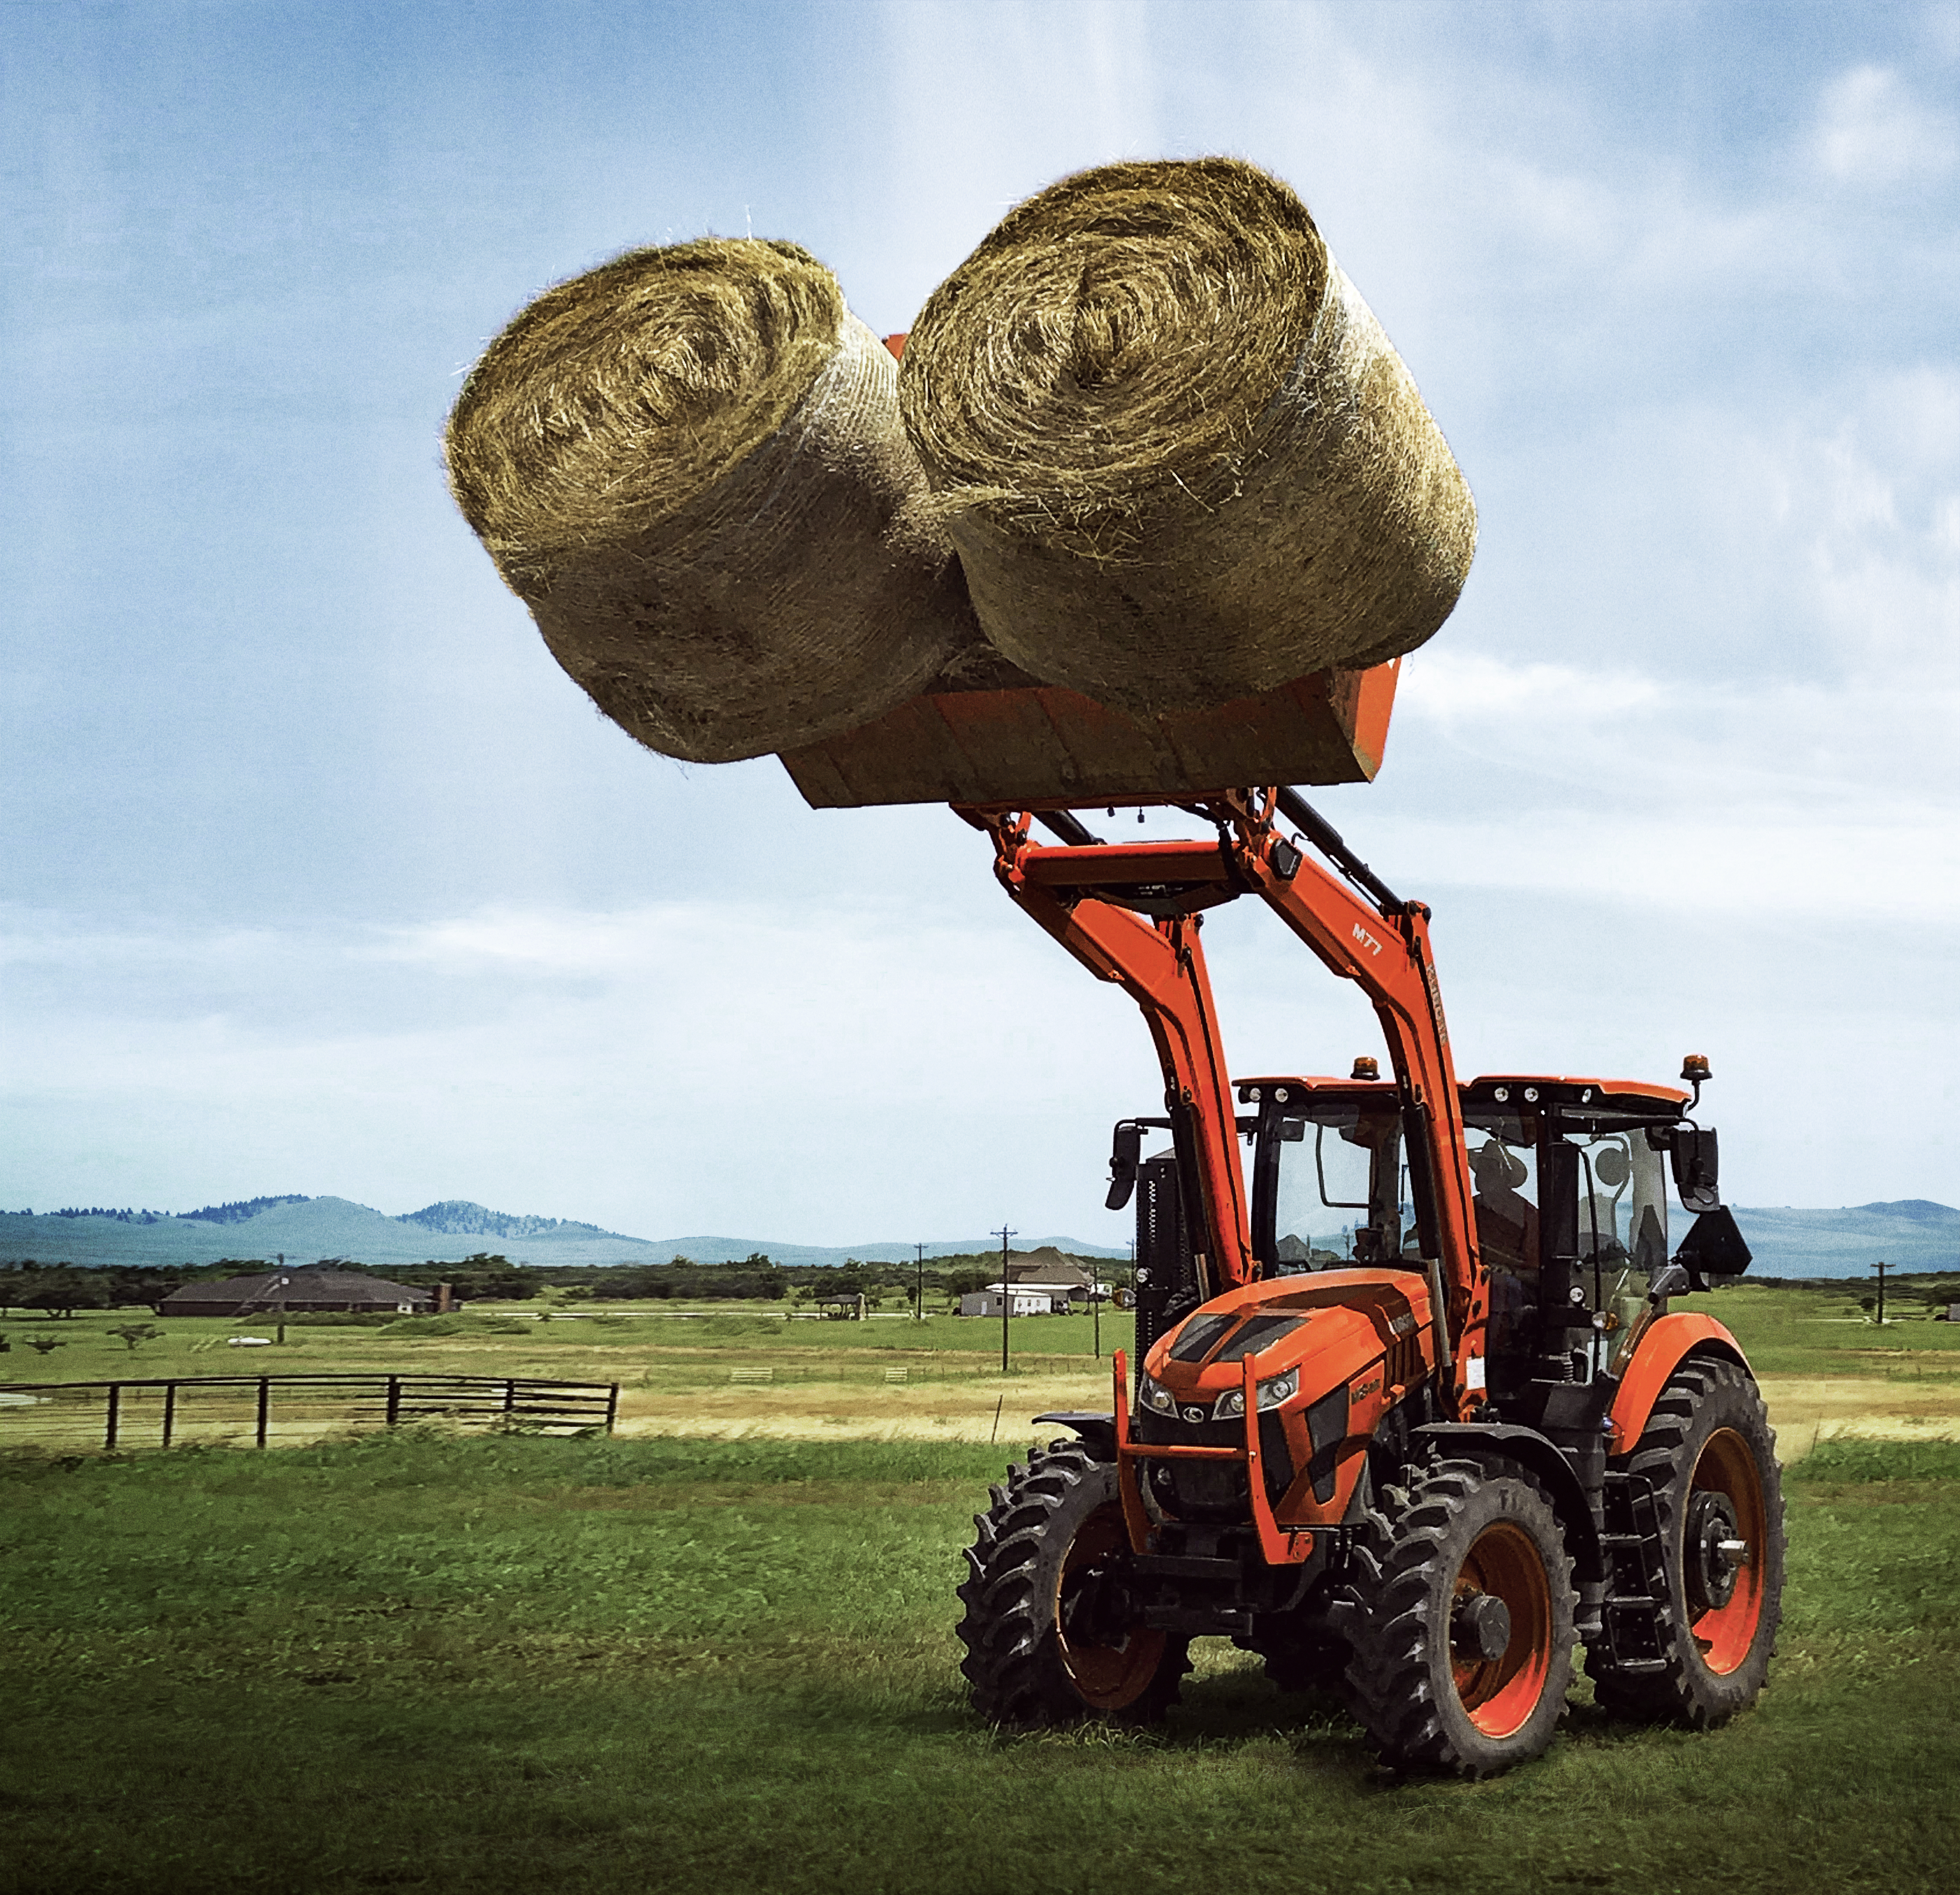 Cummins steps in to provide power and reliability for Kubota's biggest  tractor ever